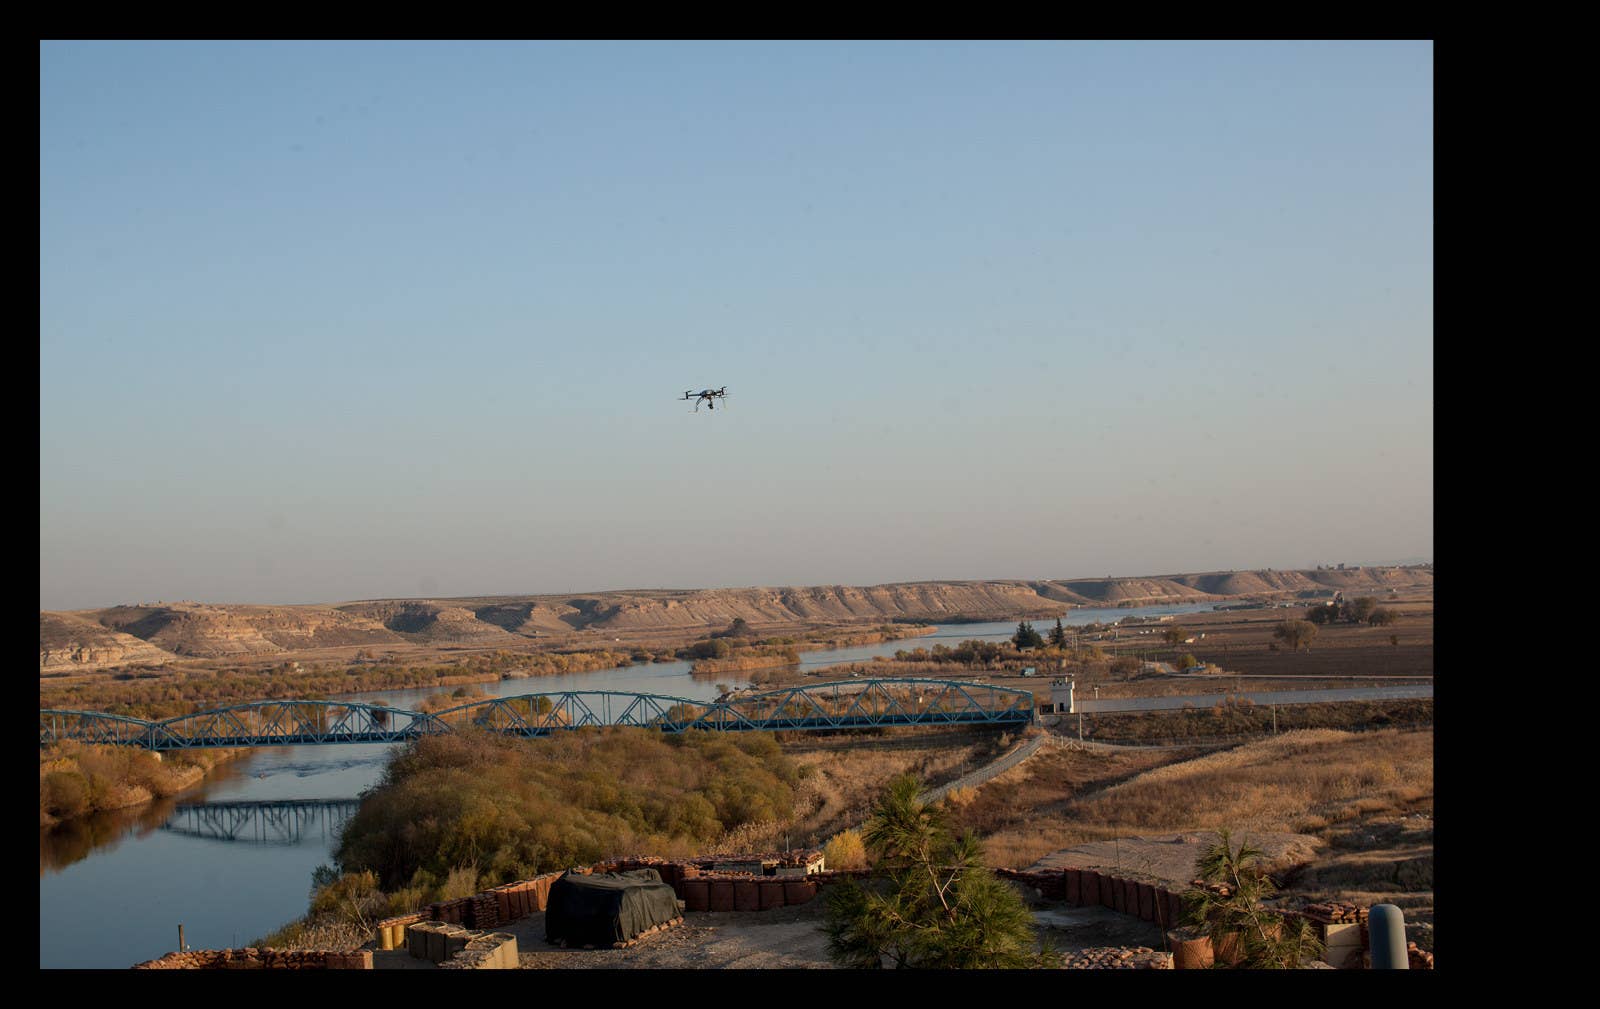 A surveillance drone returns to a Turkish army outpost after patrolling the border with Syria.